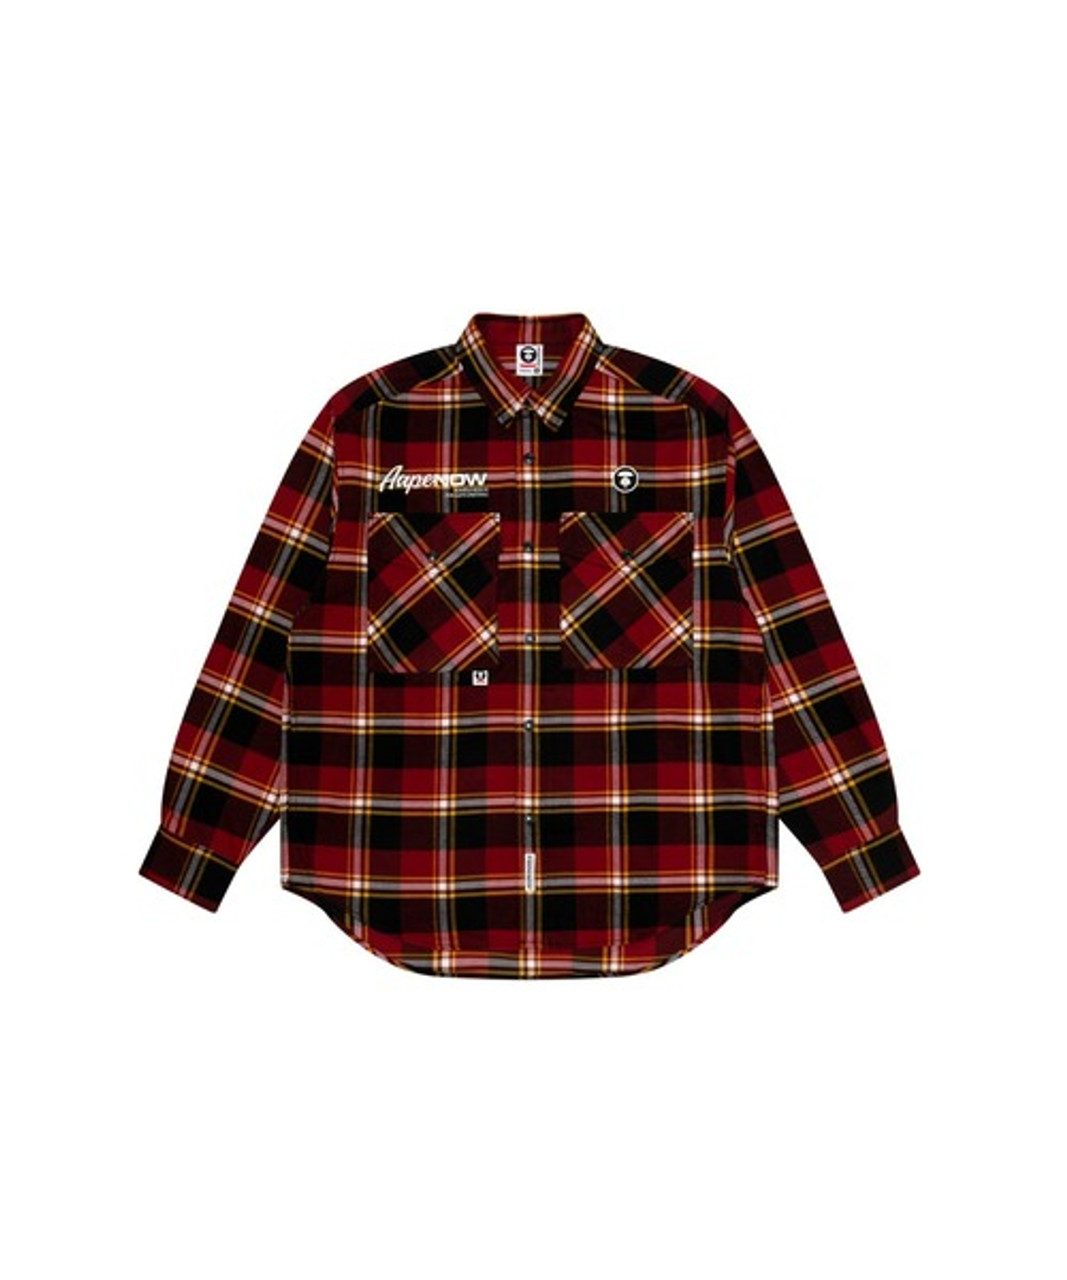 AAPE NOW CHECK LONG SLEEVE SHIRTS AAPSTM8460XXL